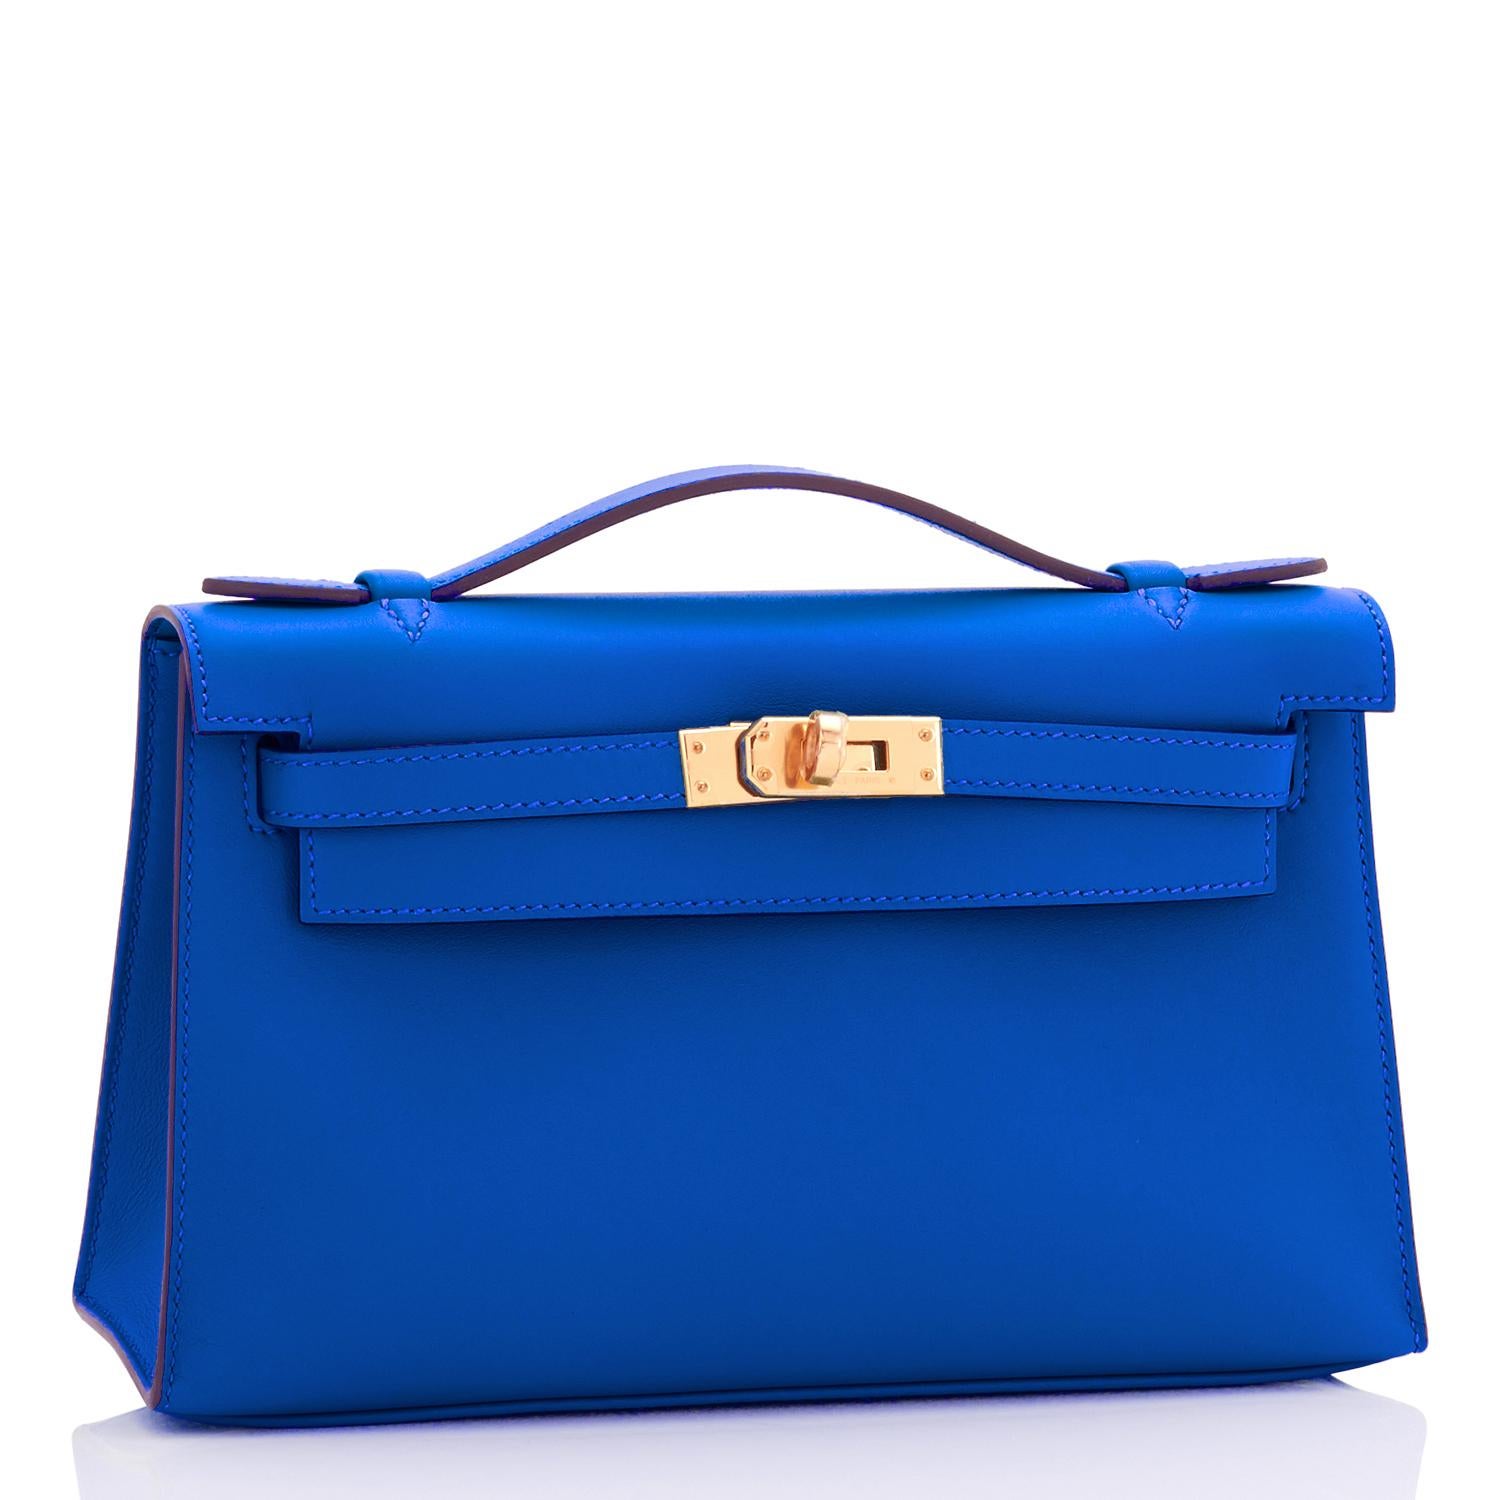 Hermes Kelly Pochette Blue France Gold Hardware Clutch Cut Bag U Stamp, 2022
New color Blue France is spectacularly gorgeous and perfect for spring summer!
Just purchased from Hermes store; bag bears new 2022 interior U Stamp.
Brand New in Box.